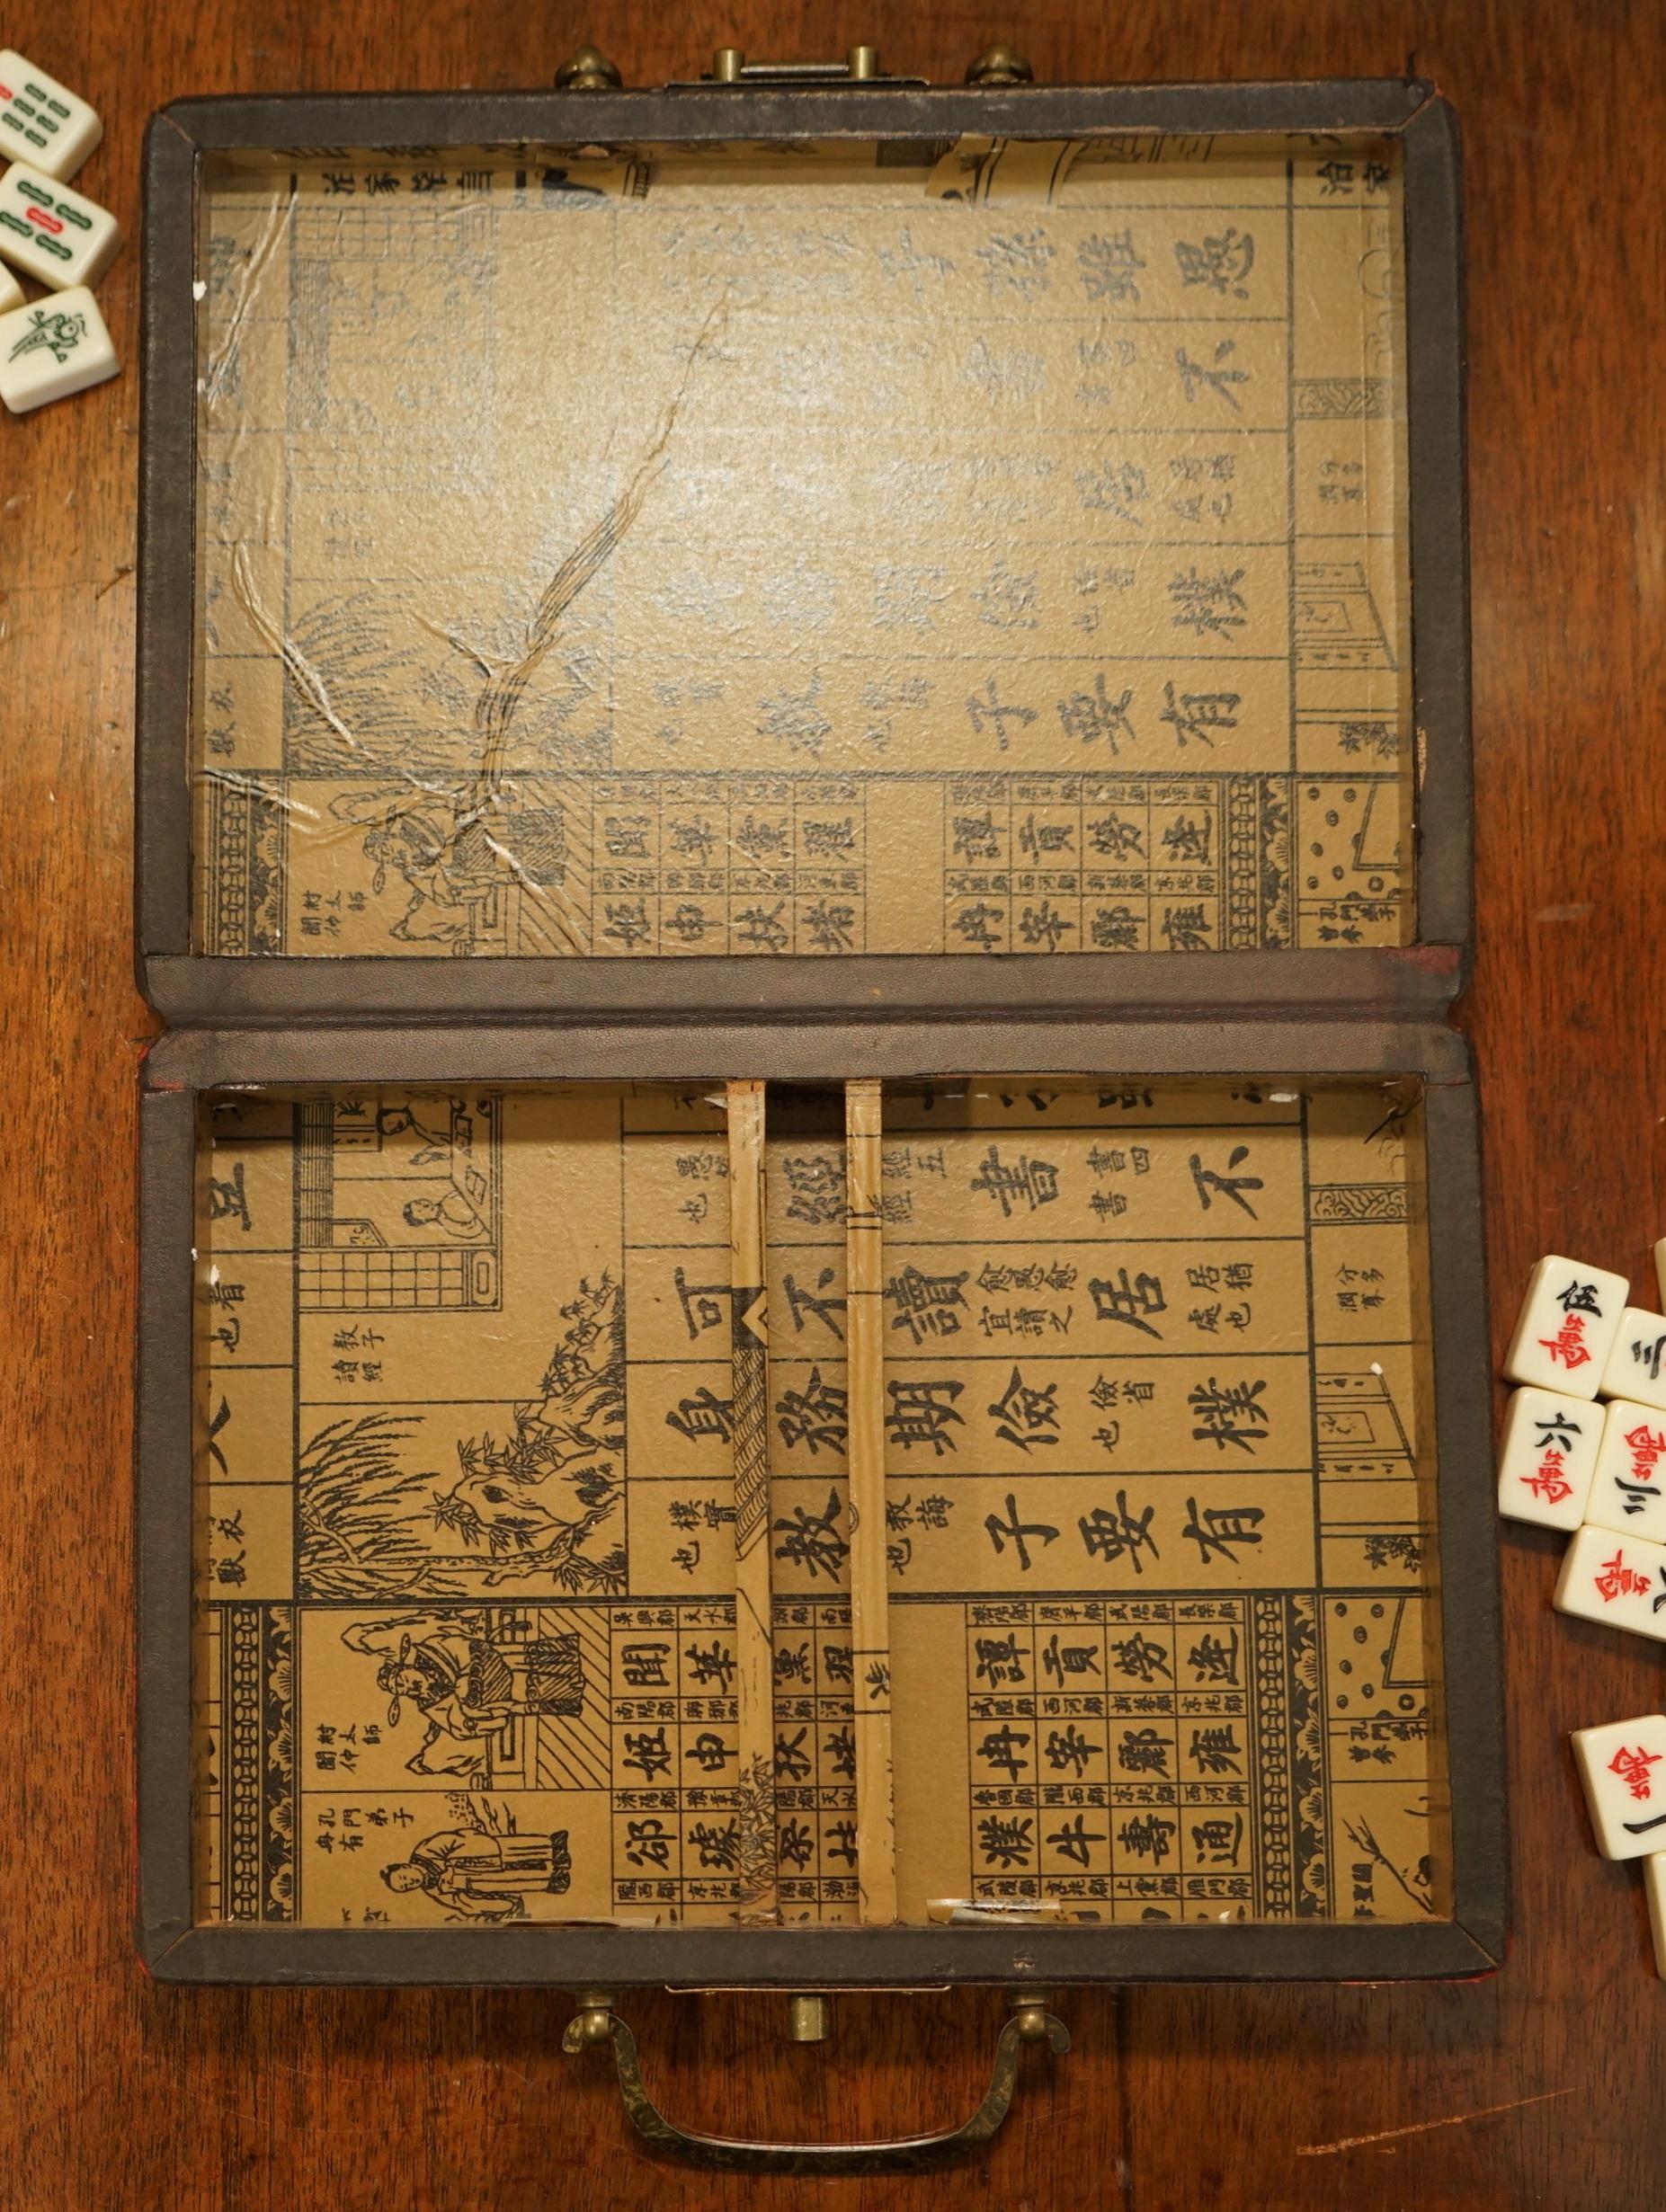 Royal House Antiques

Royal House Antiques is delighted to offer for sale this lovely original circa 1950's Chinese Mah-jong set which is totally complete with original dice

A very nice suite, in the original case which is very decorative 

The